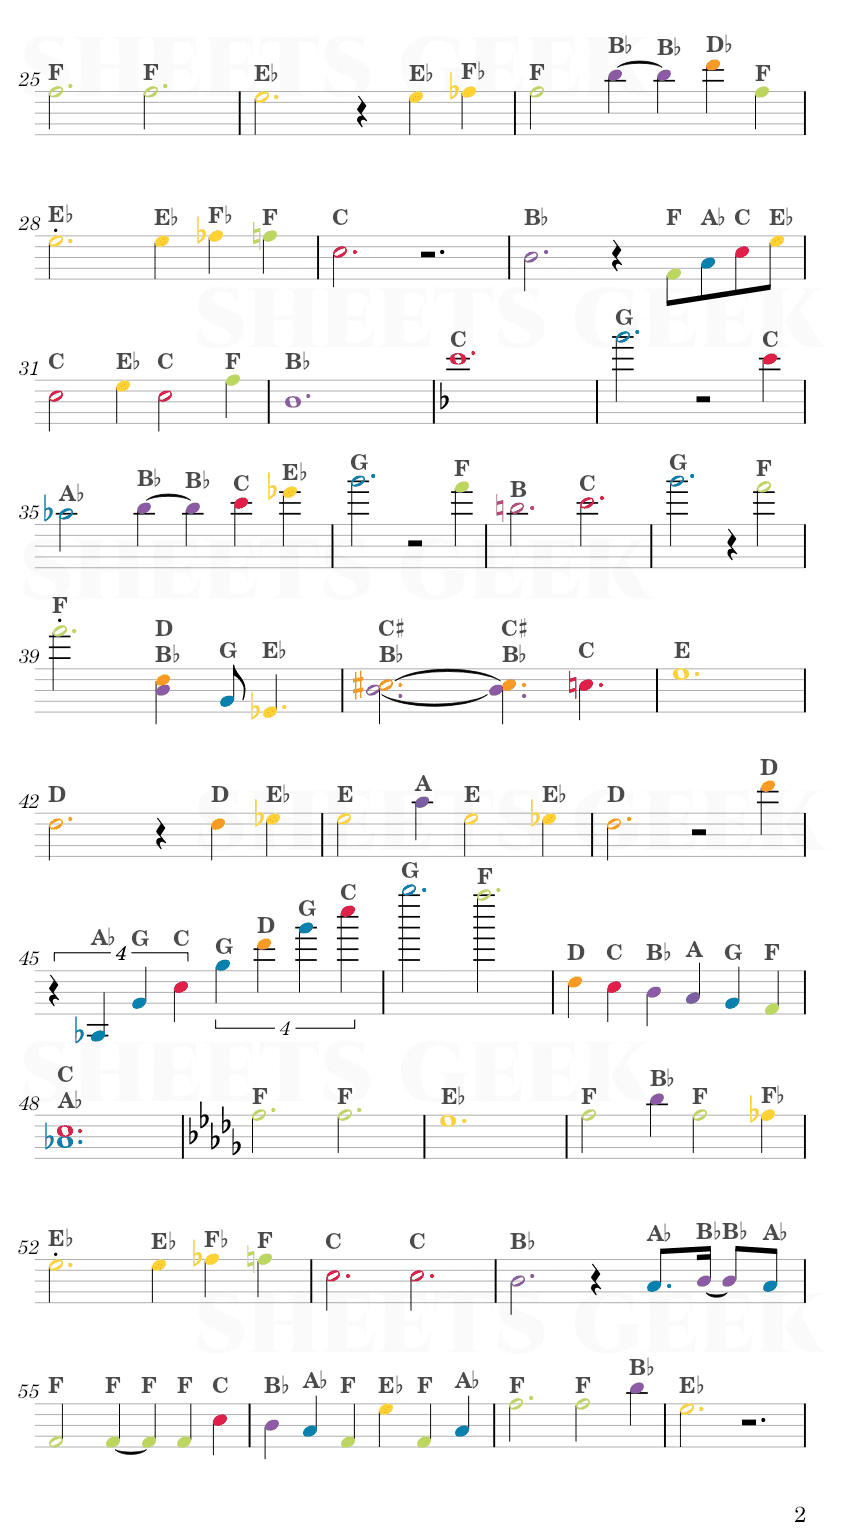 Ylang Ylang - FKJ Easy Sheet Music Free for piano, keyboard, flute, violin, sax, cello page 2